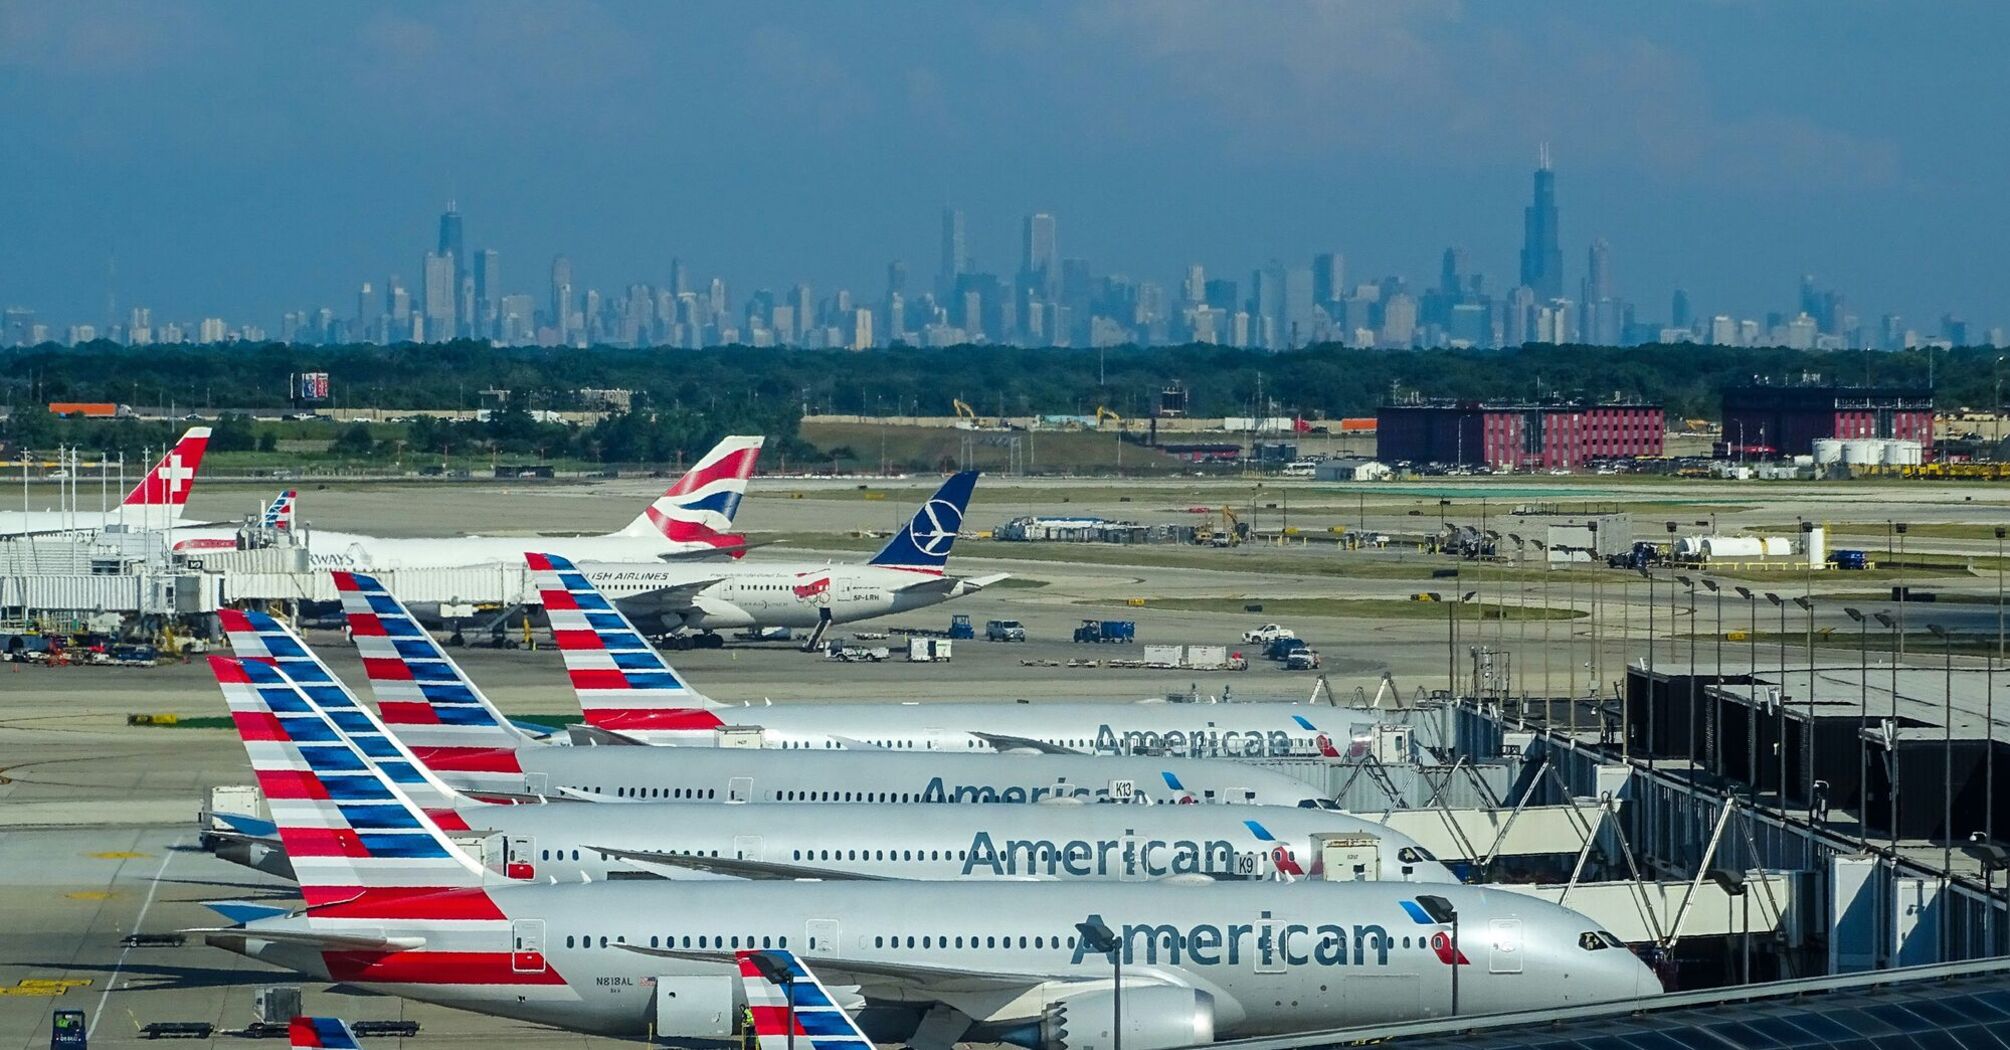 American Airlines airplanes on airport